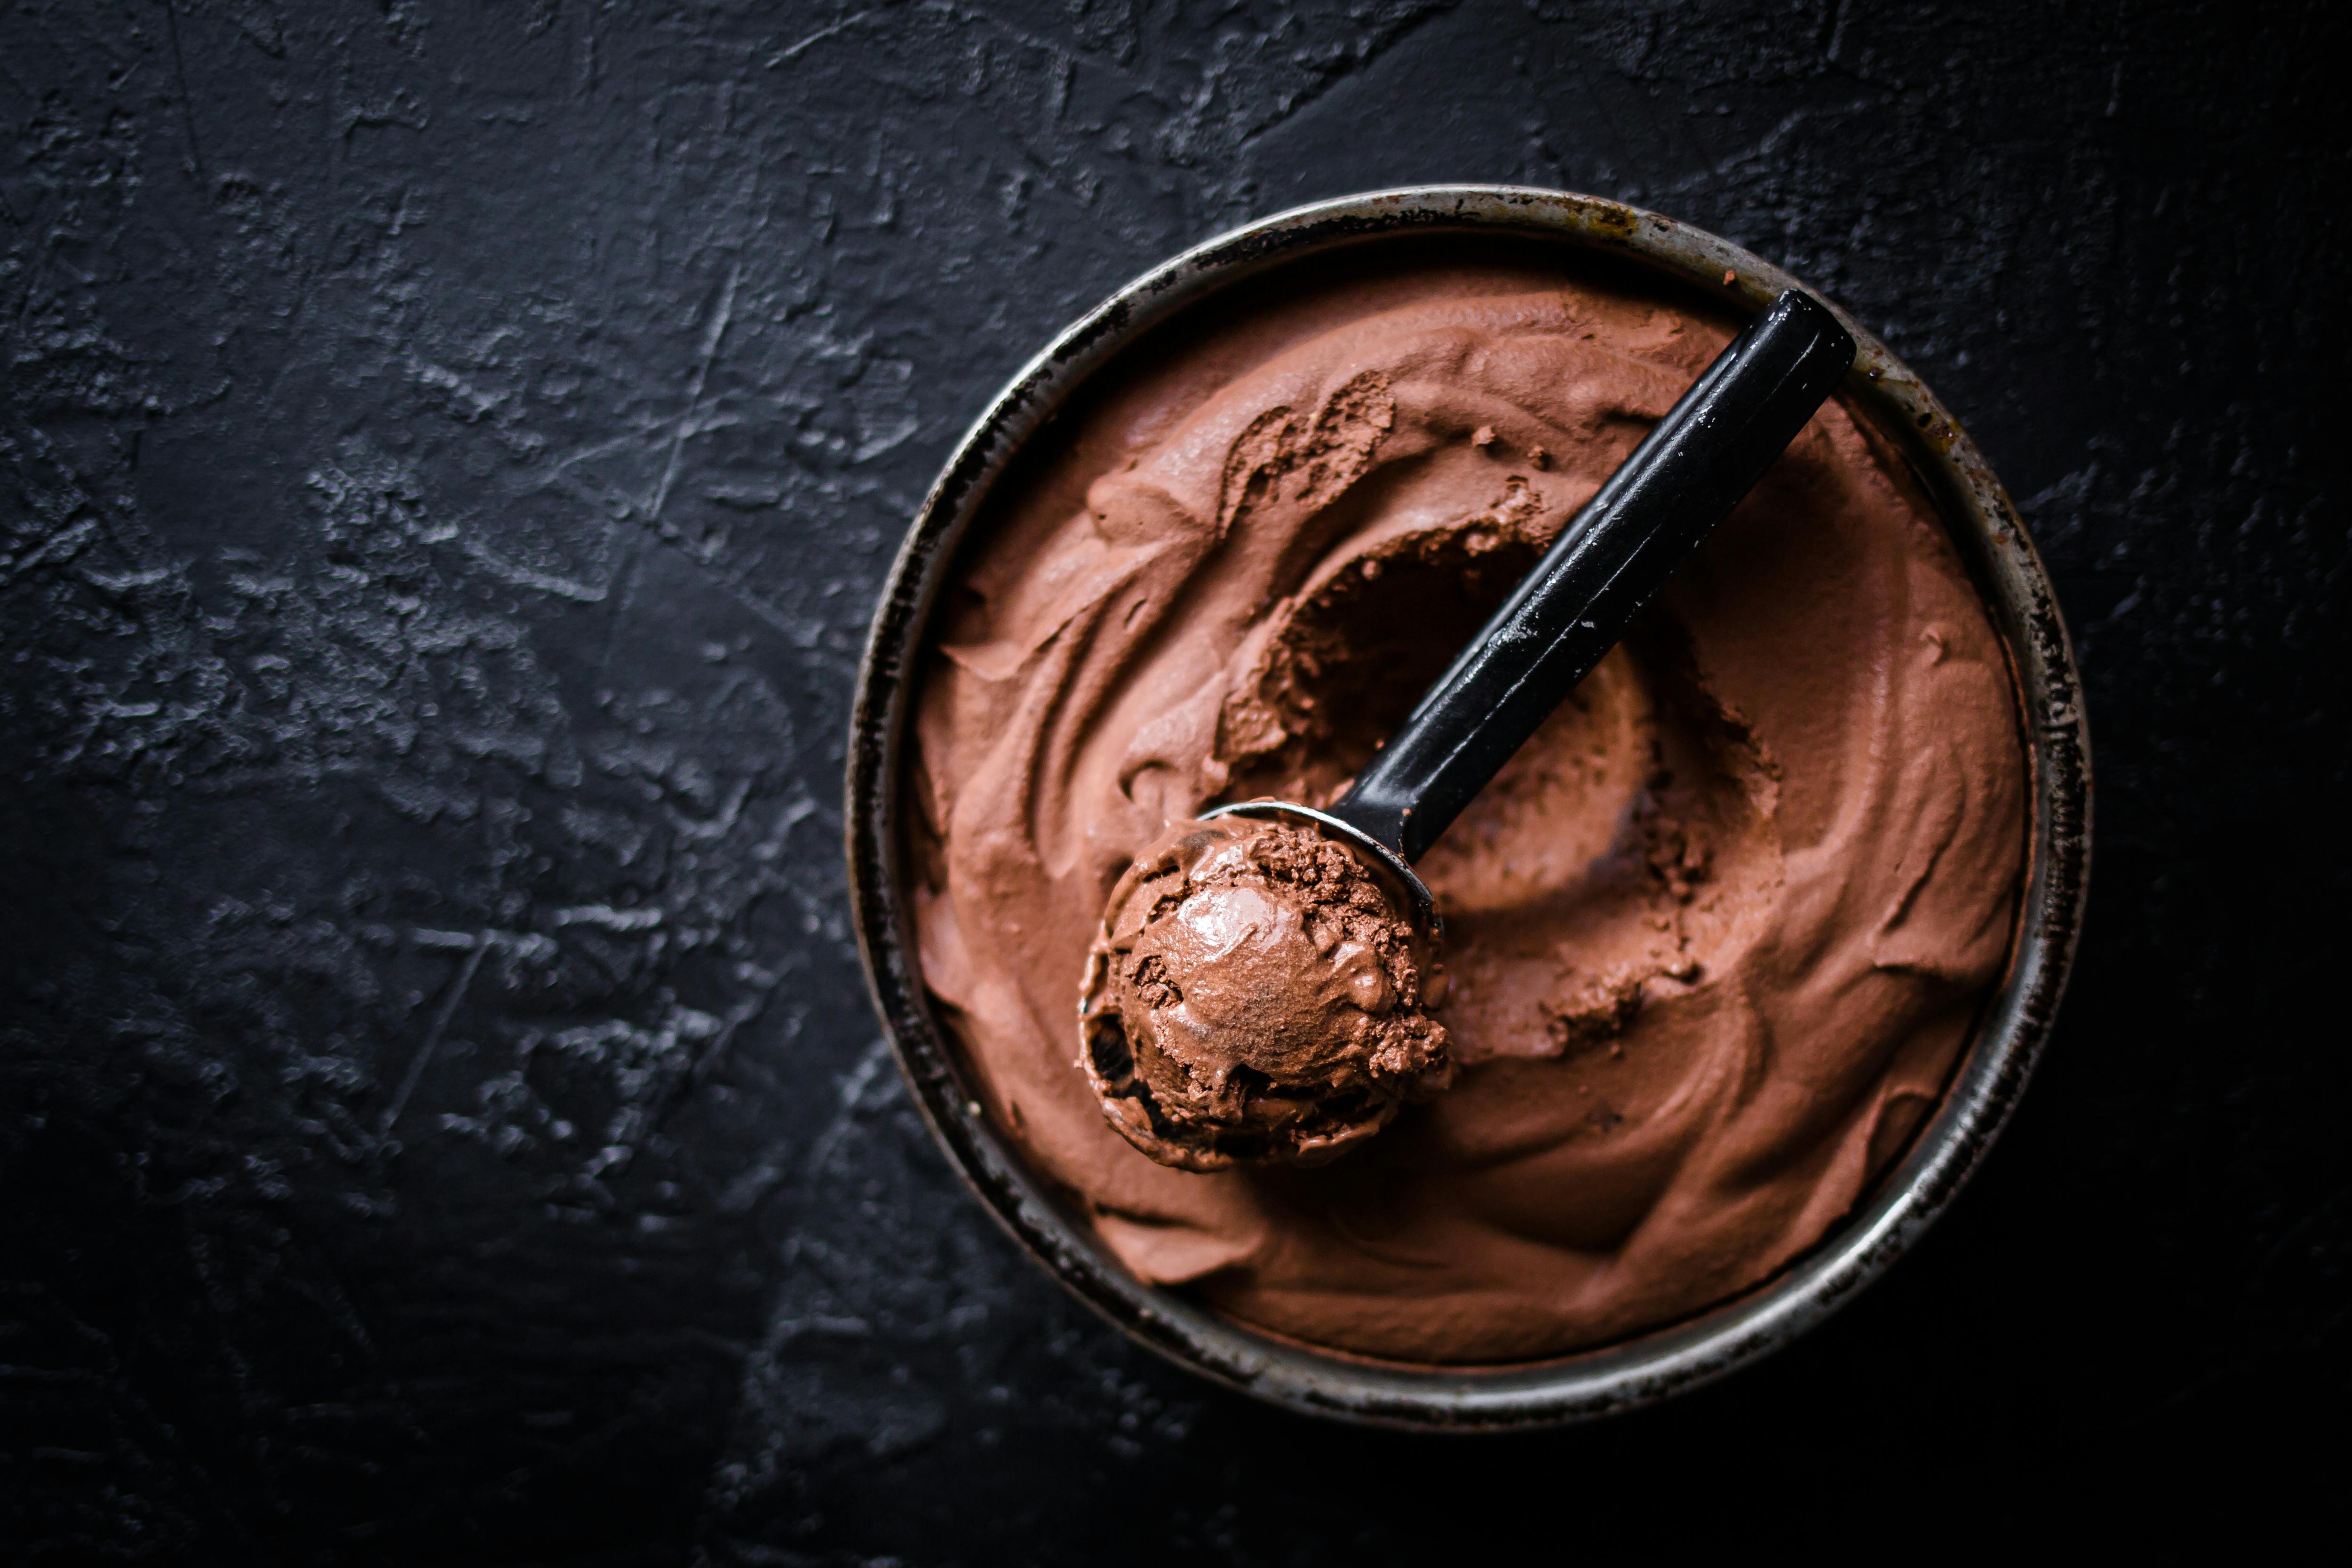 https://www.dietdoctor.com/wp-content/uploads/2020/03/Low-carb-chocolate-ice-cream-h.jpg